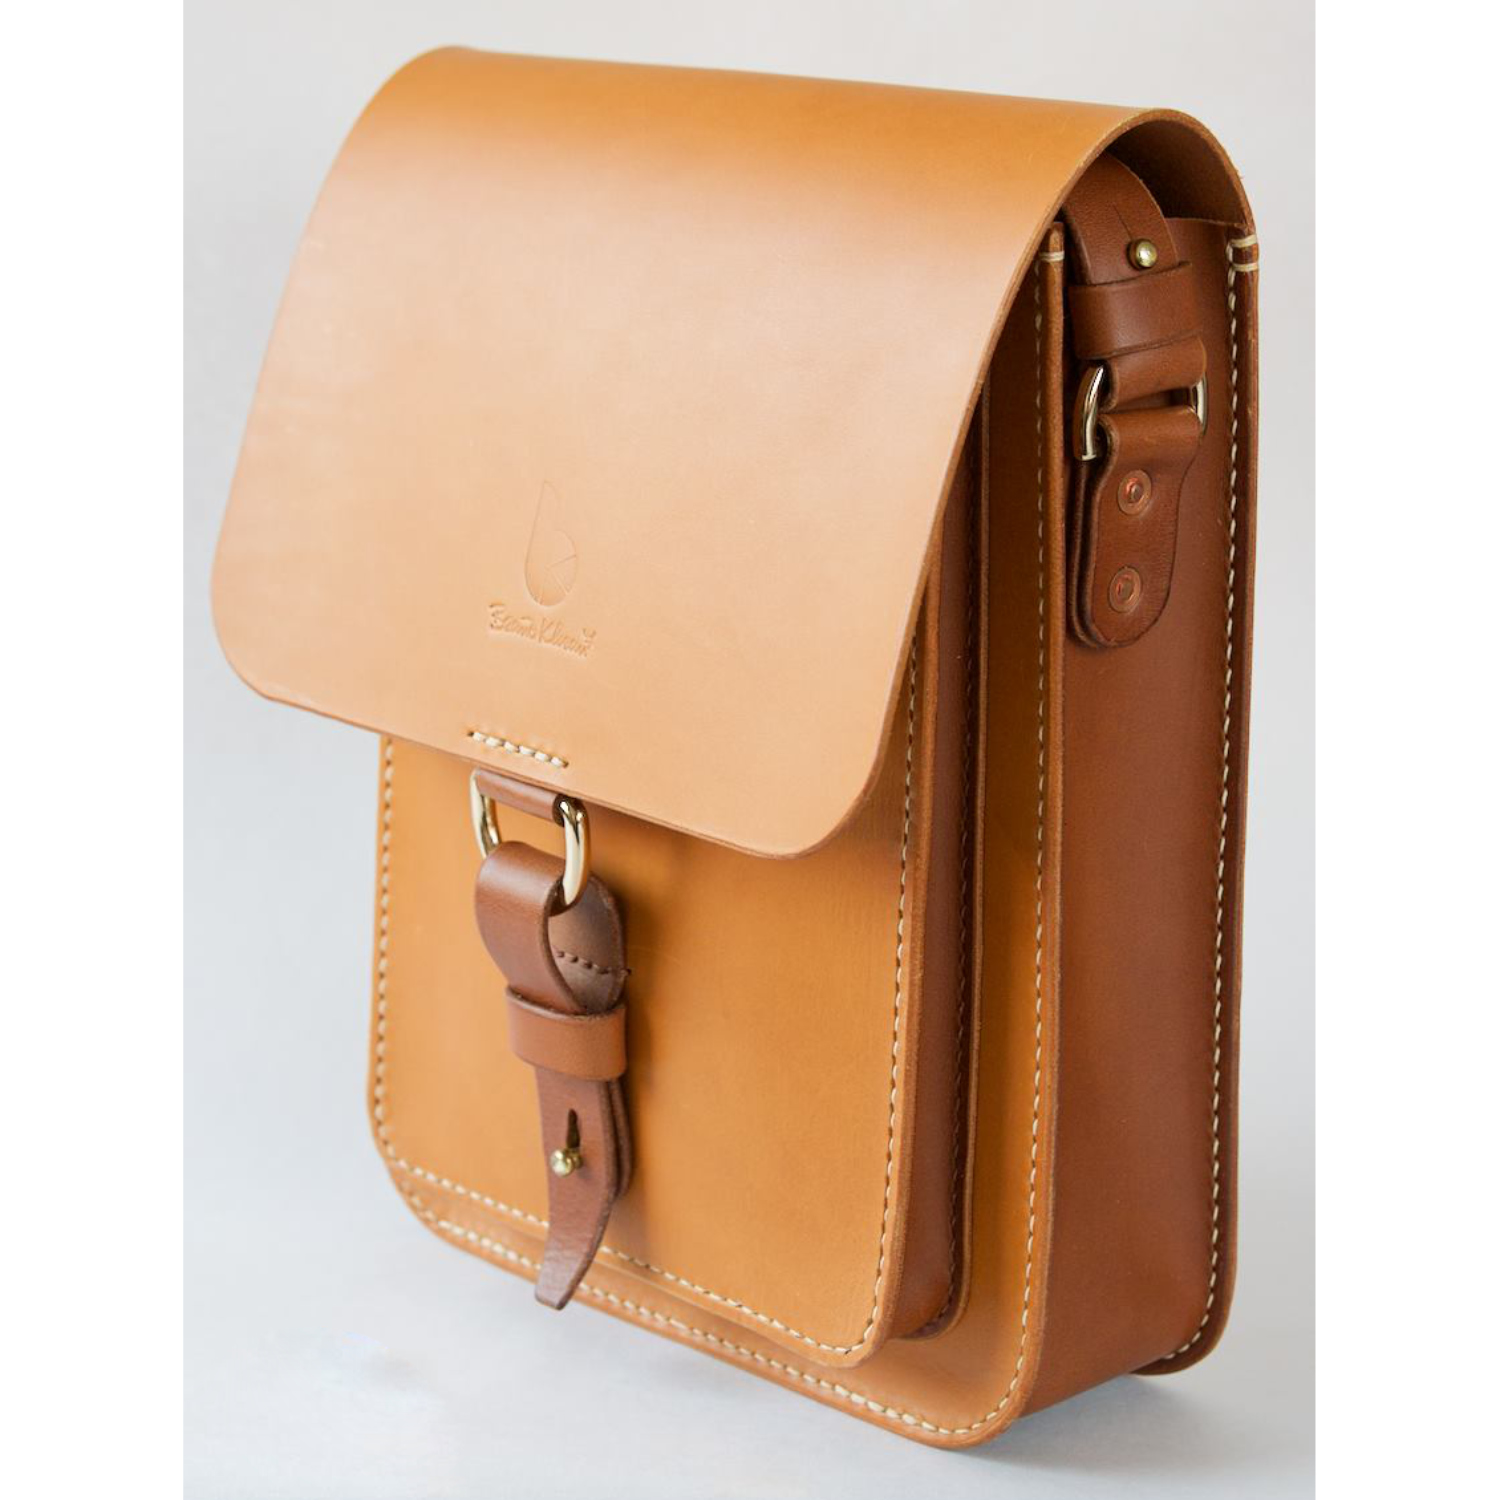 leather messenger bag with strap and dring closure